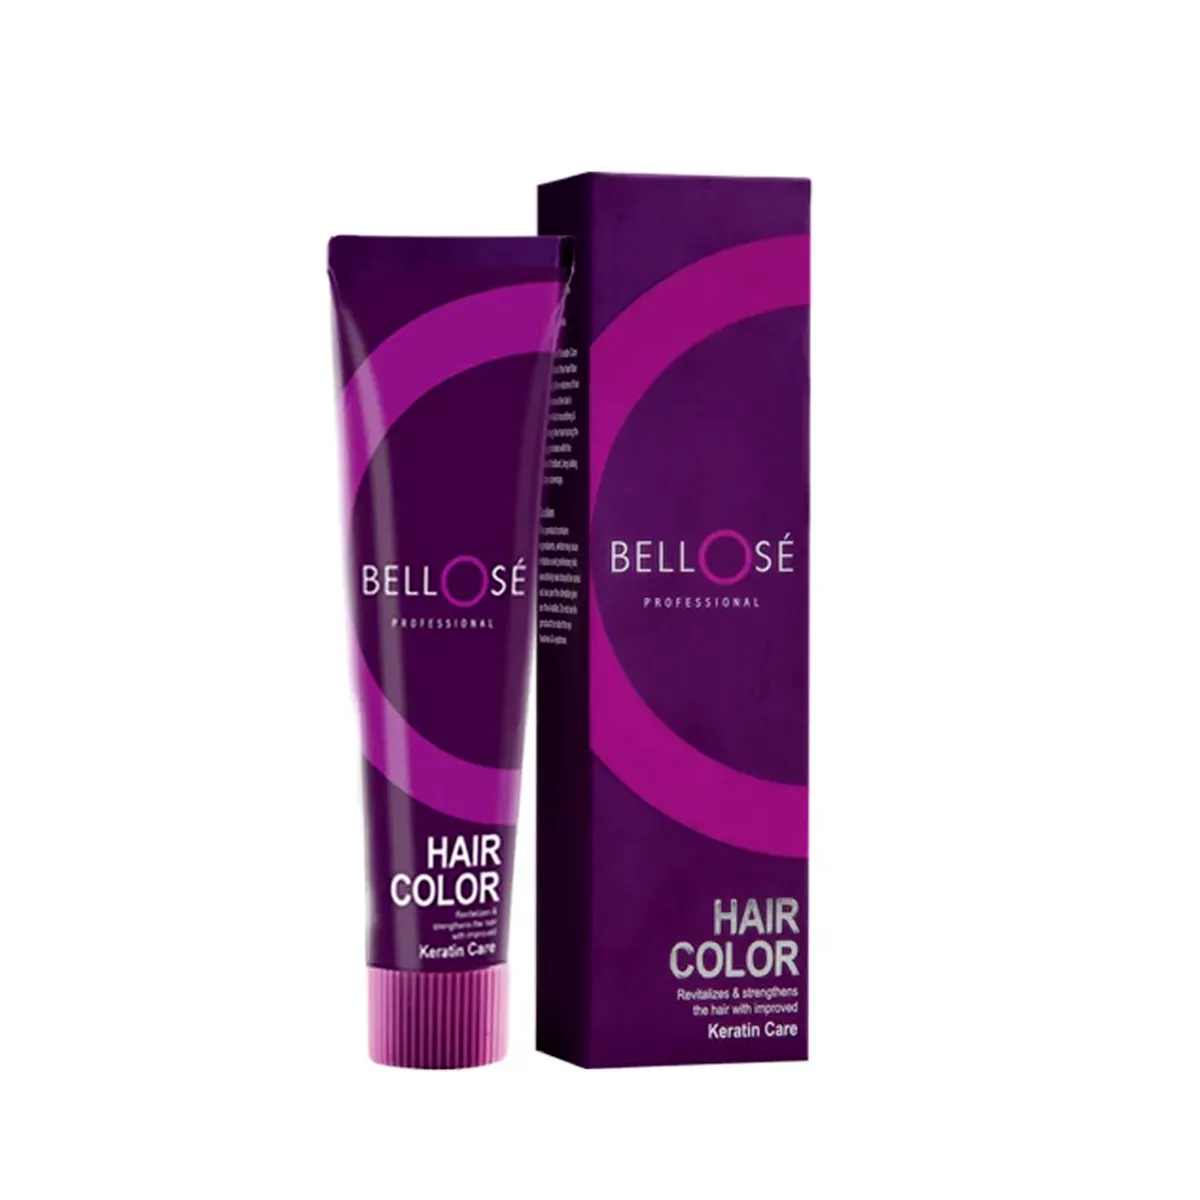 First product image of Bellose Hair Color 1.0 60ml